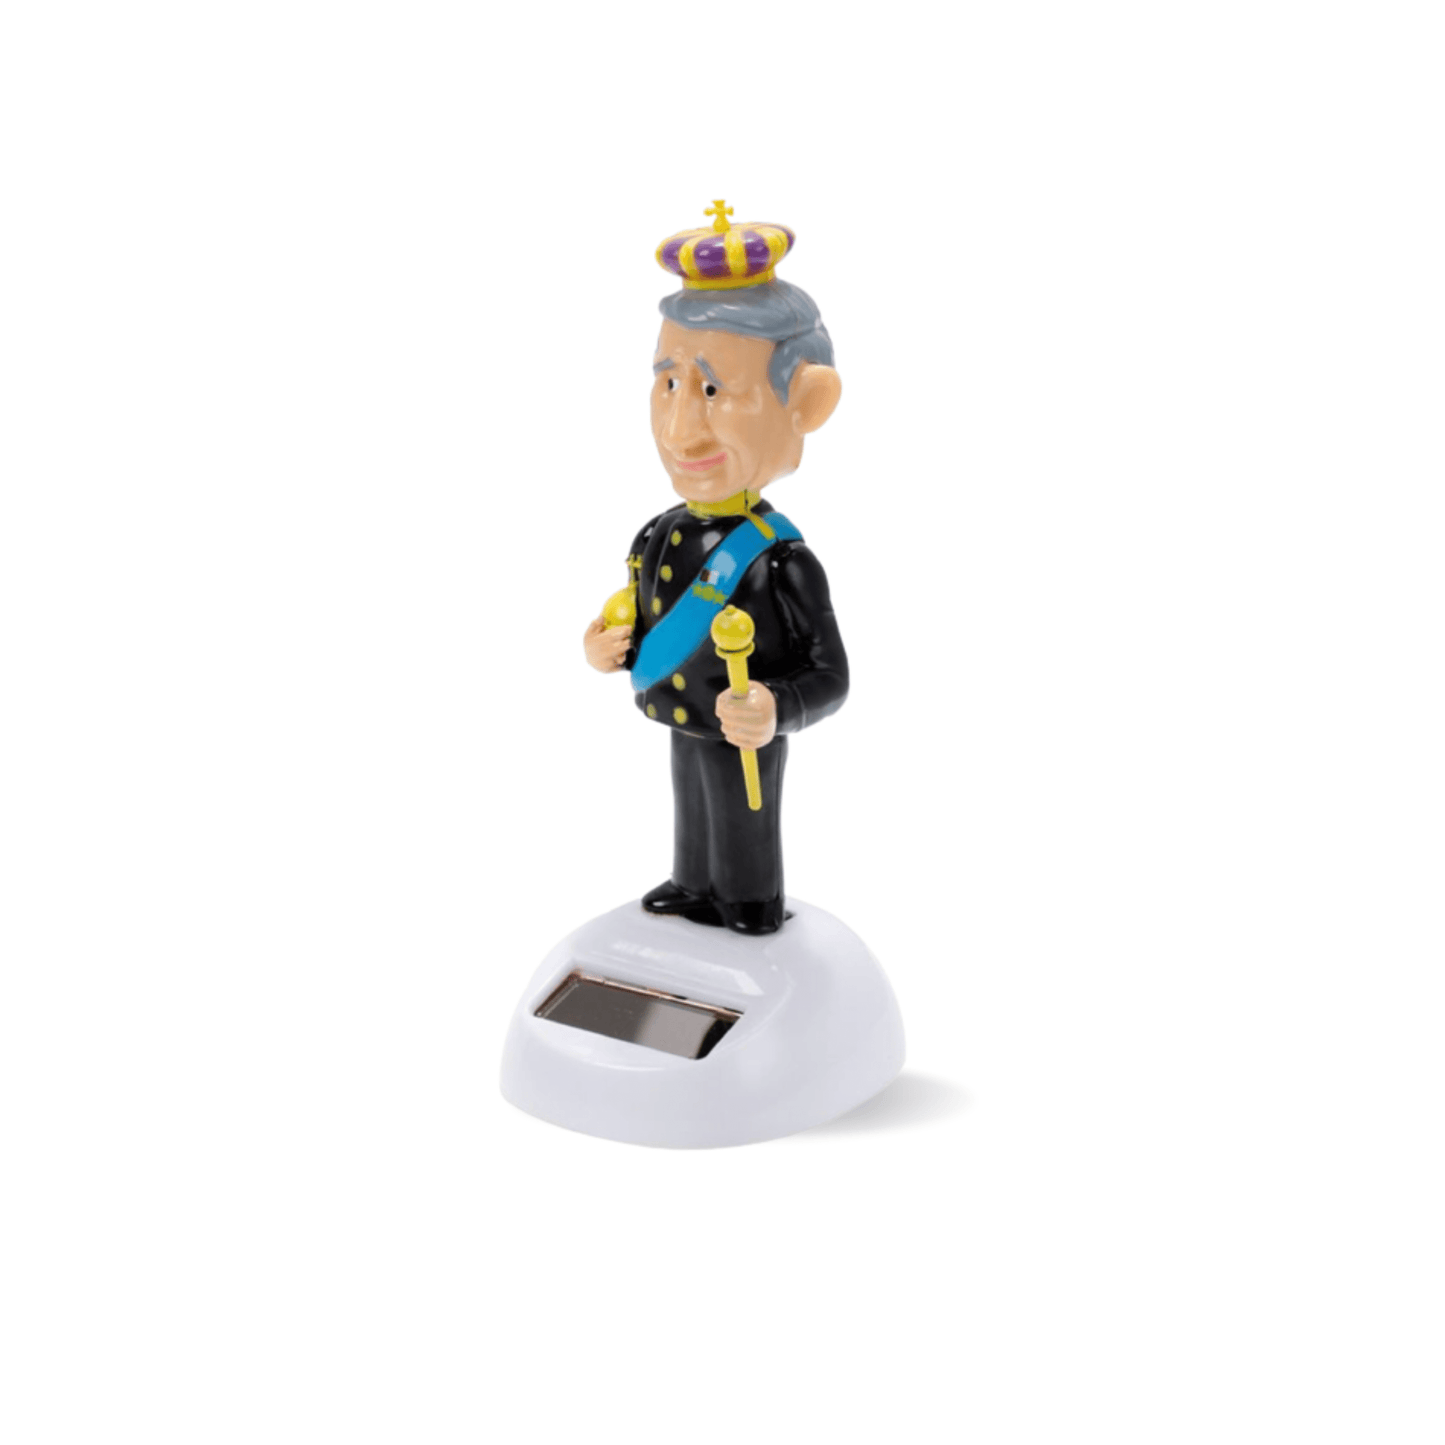 Dancing King Charles solar powered bobblehead. The perfect novel gift to enjoy a laugh every time you encounter His Majesty The King.